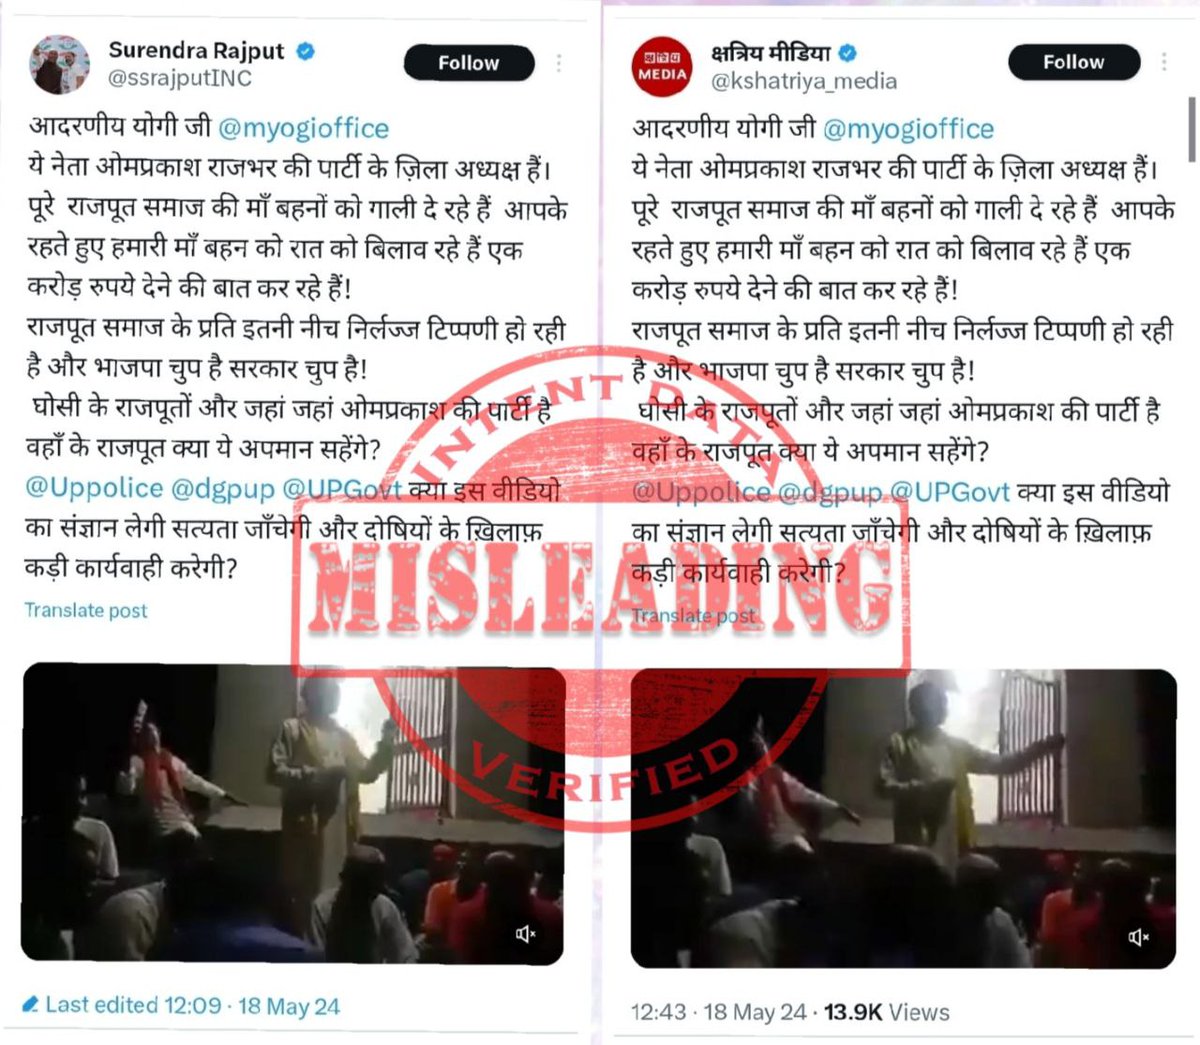 1981
ANALYSIS: Misleading 

FACT: A video that shows a man abusing Thakur/Rajput community has been shared claiming to be a recent video of Suheldev Bhartiya Samaj Party (SBSP) leader. The fact is that this is an old video from Mau, Uttar Pradesh (1/3)